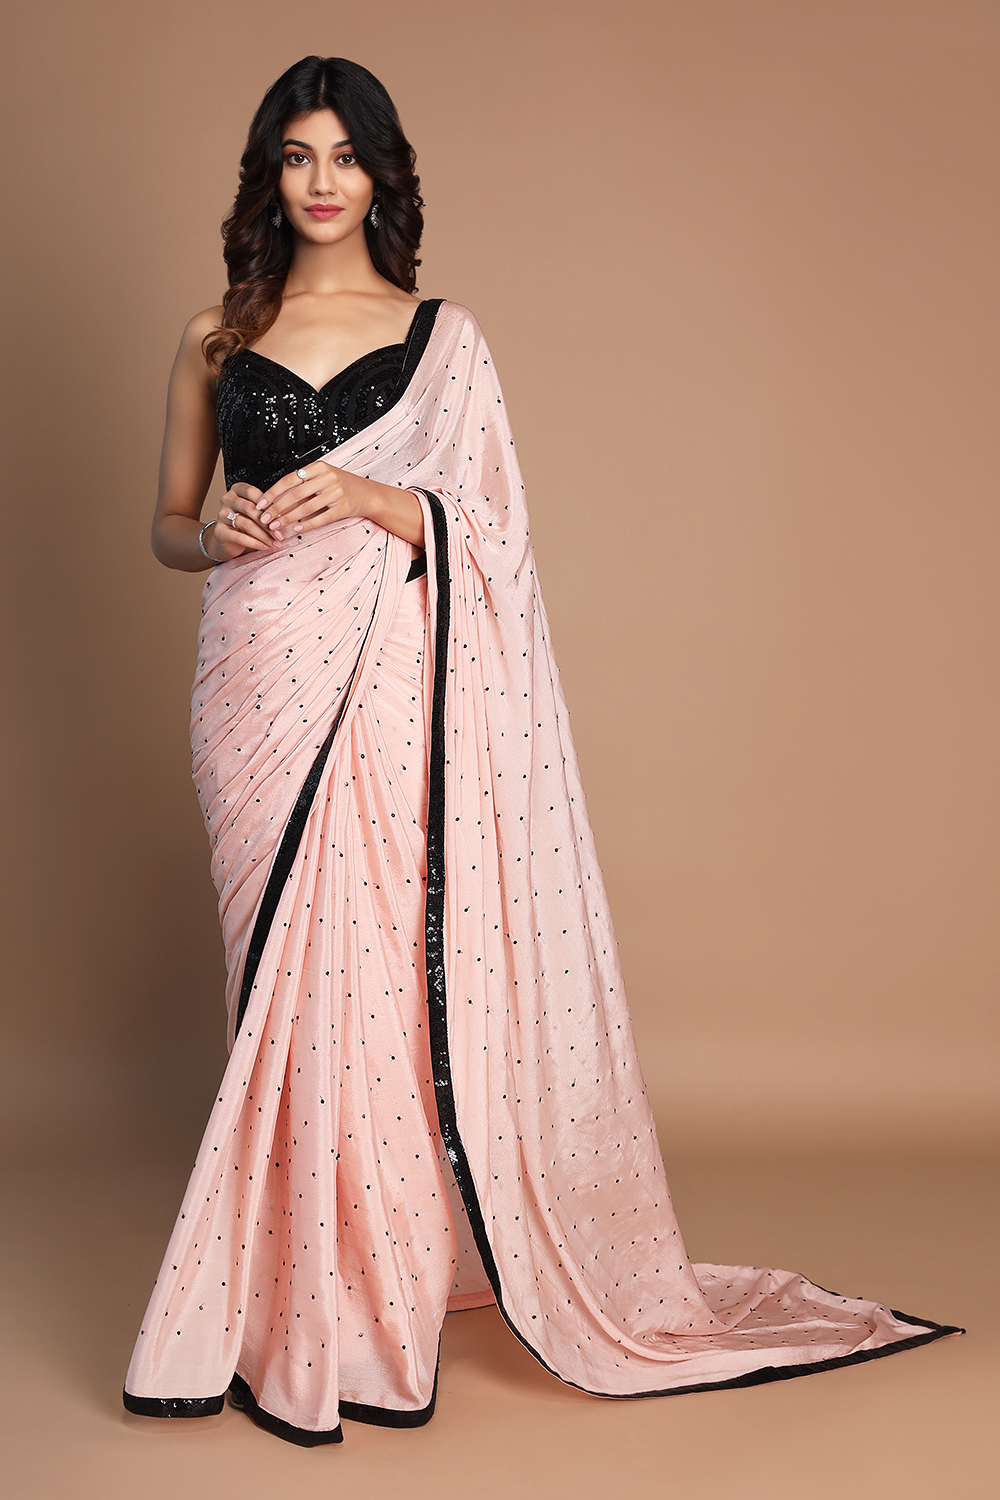 WOVEN WORK Peach Pure Bollywood Simmer Silk Saree, 5.5 m (separate blouse  piece) at Rs 750/piece in Surat